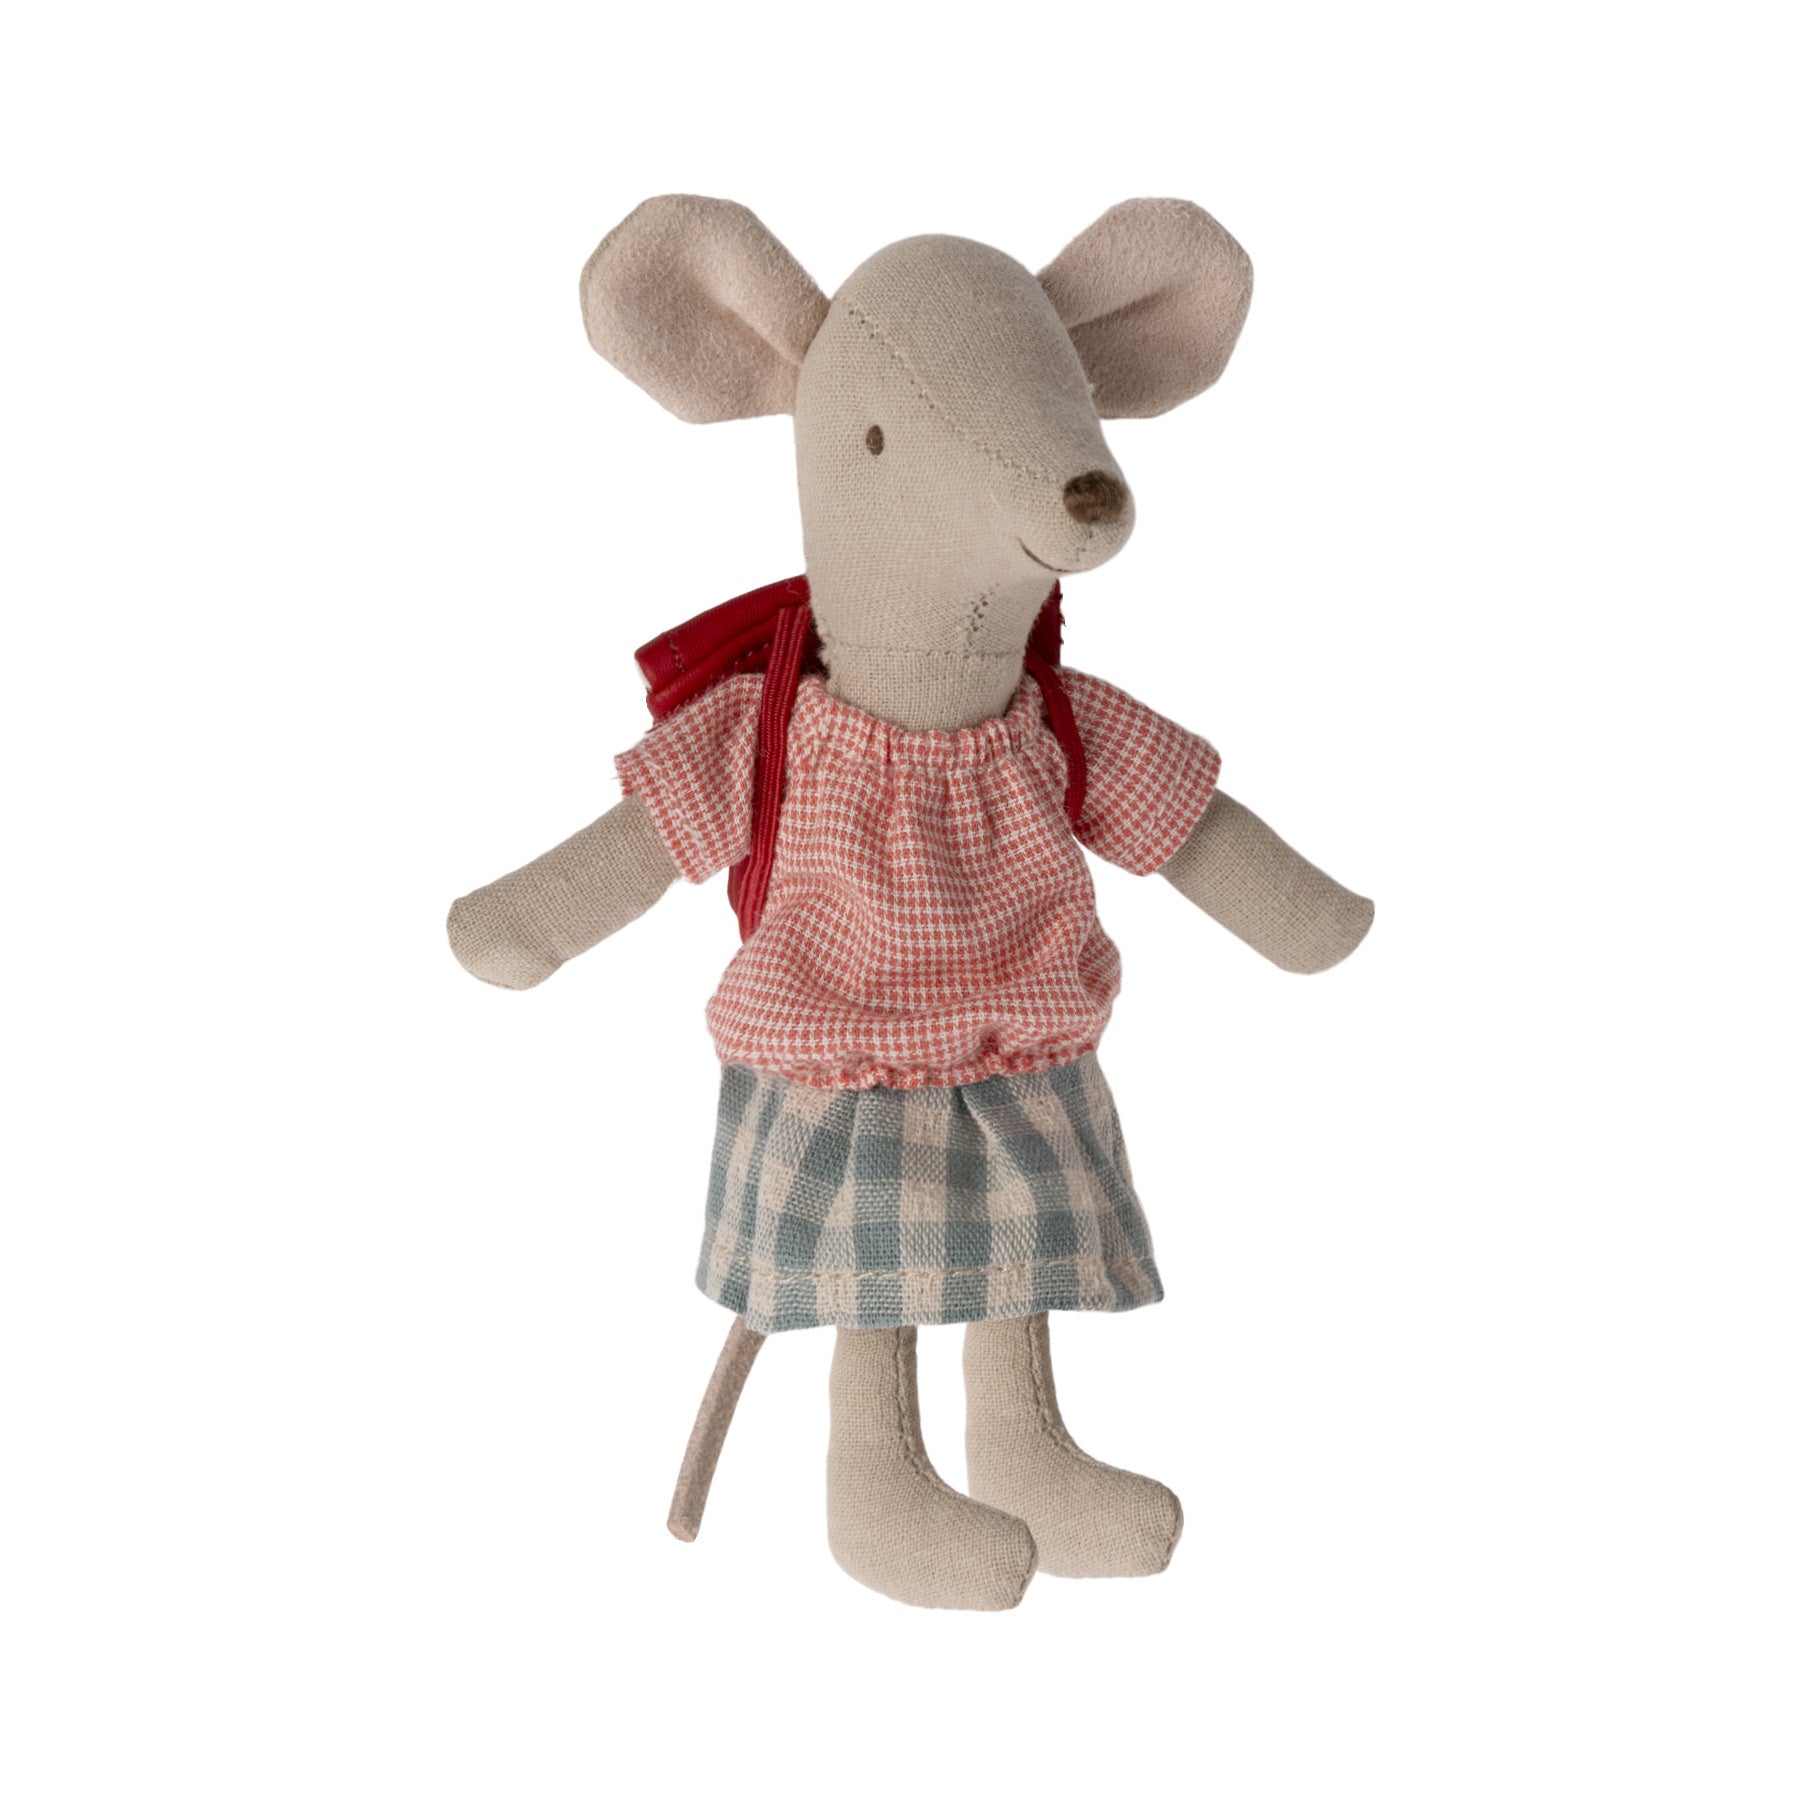 maileg girl mouse in red check top, blue check skirt with a red rucksack on her back